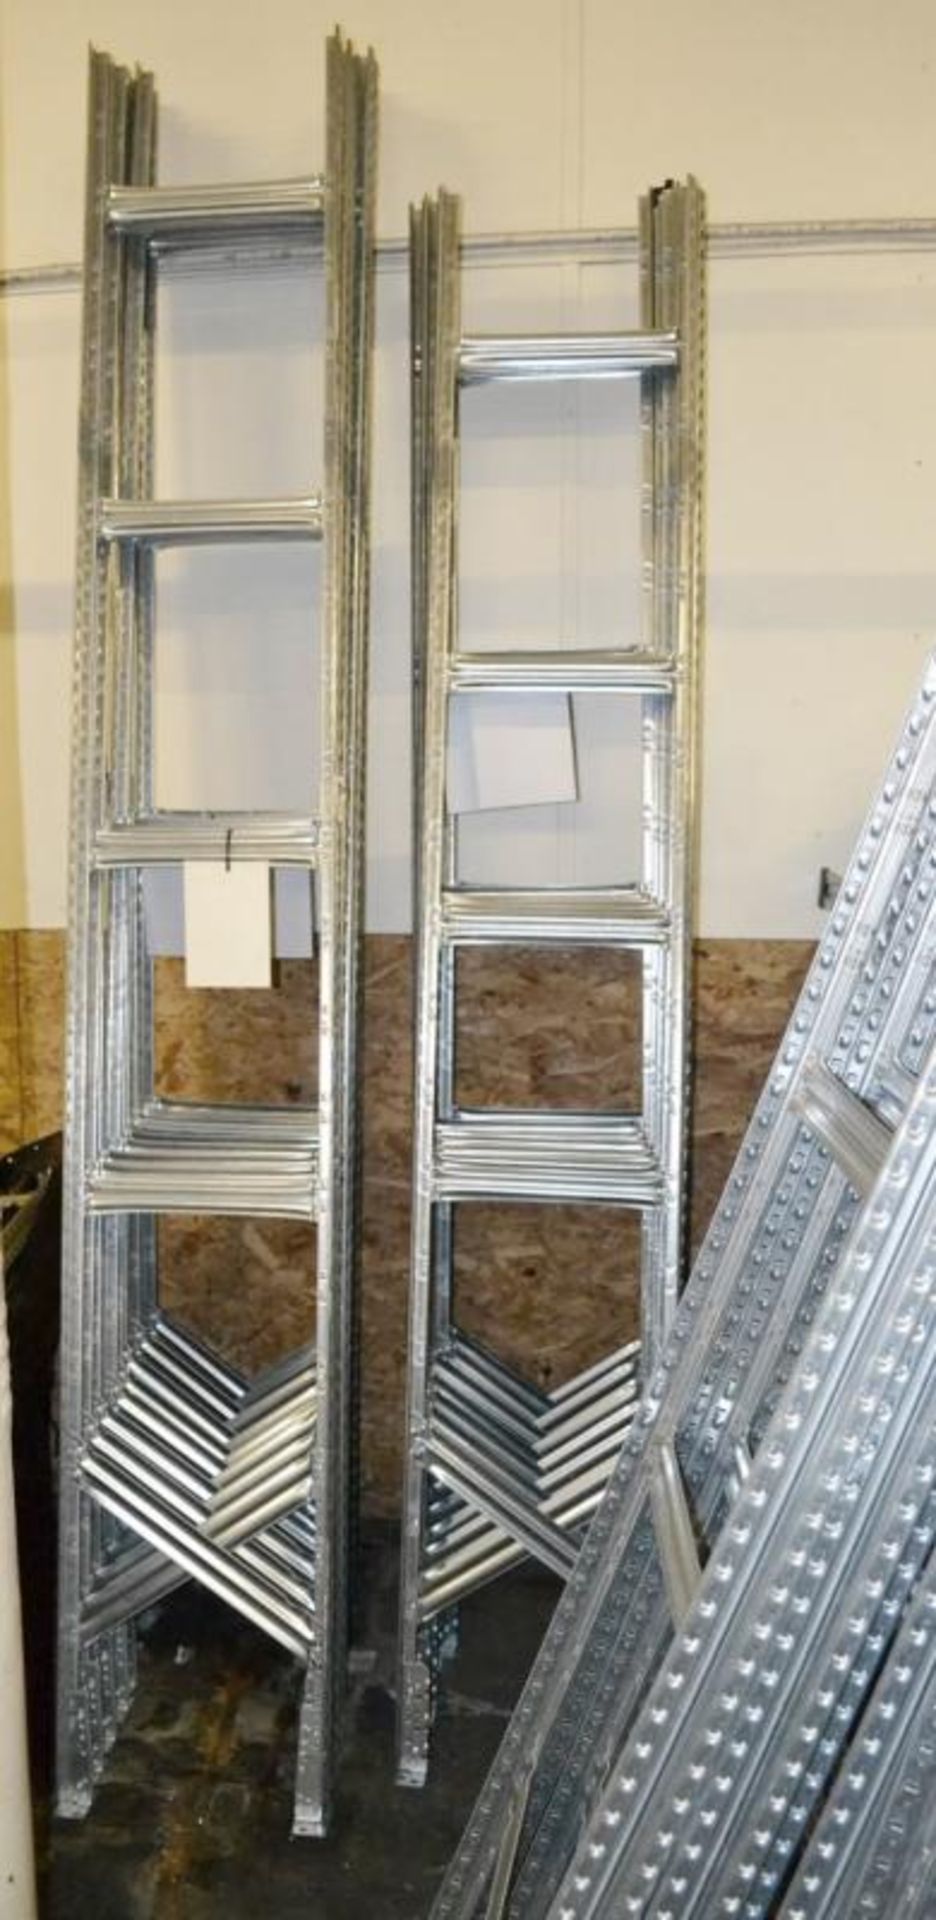 4 x Bays of Metalsistem Steel Modular Storage Shelving - Includes 29 Pieces - Recently Removed - Image 13 of 17